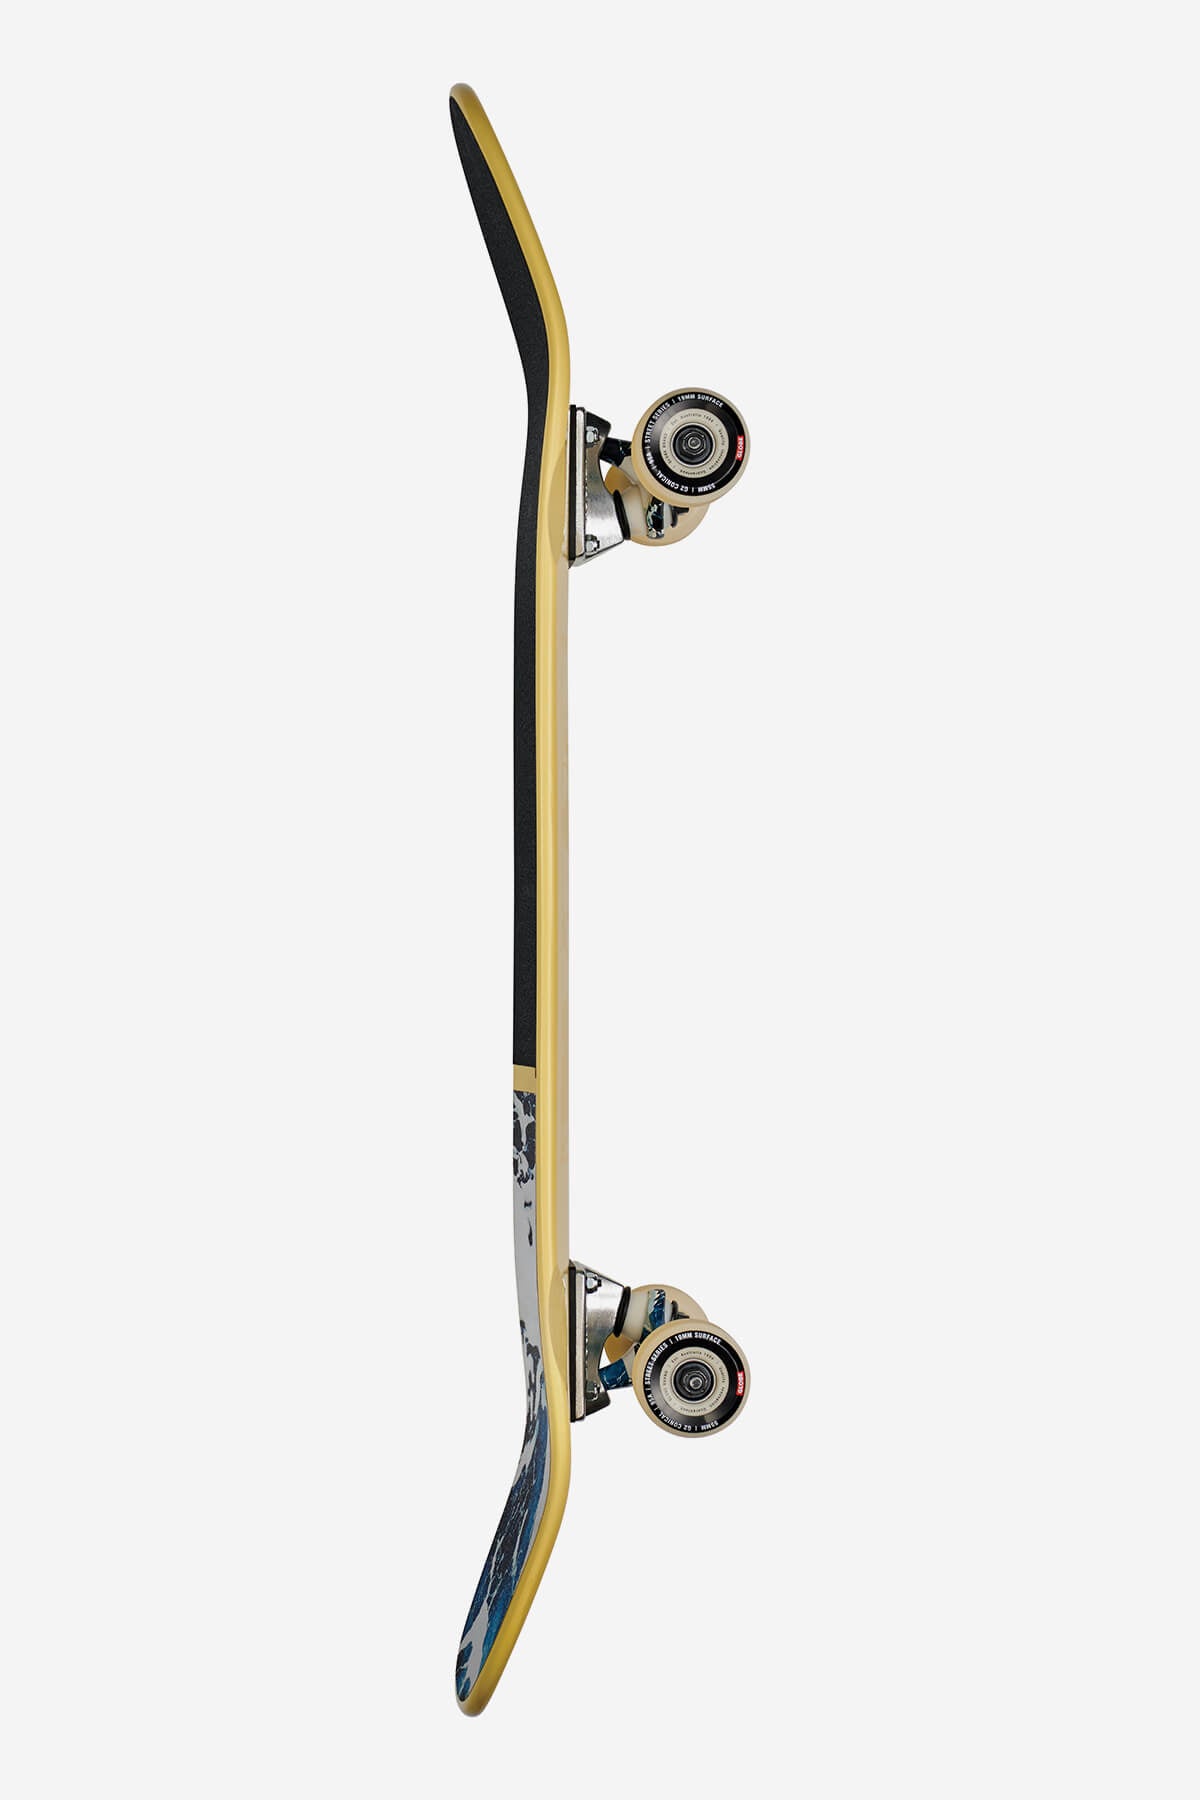 Globe Skateboard completes Shooter - 8.625" Complete Skateboard in Yellow/ComeHell